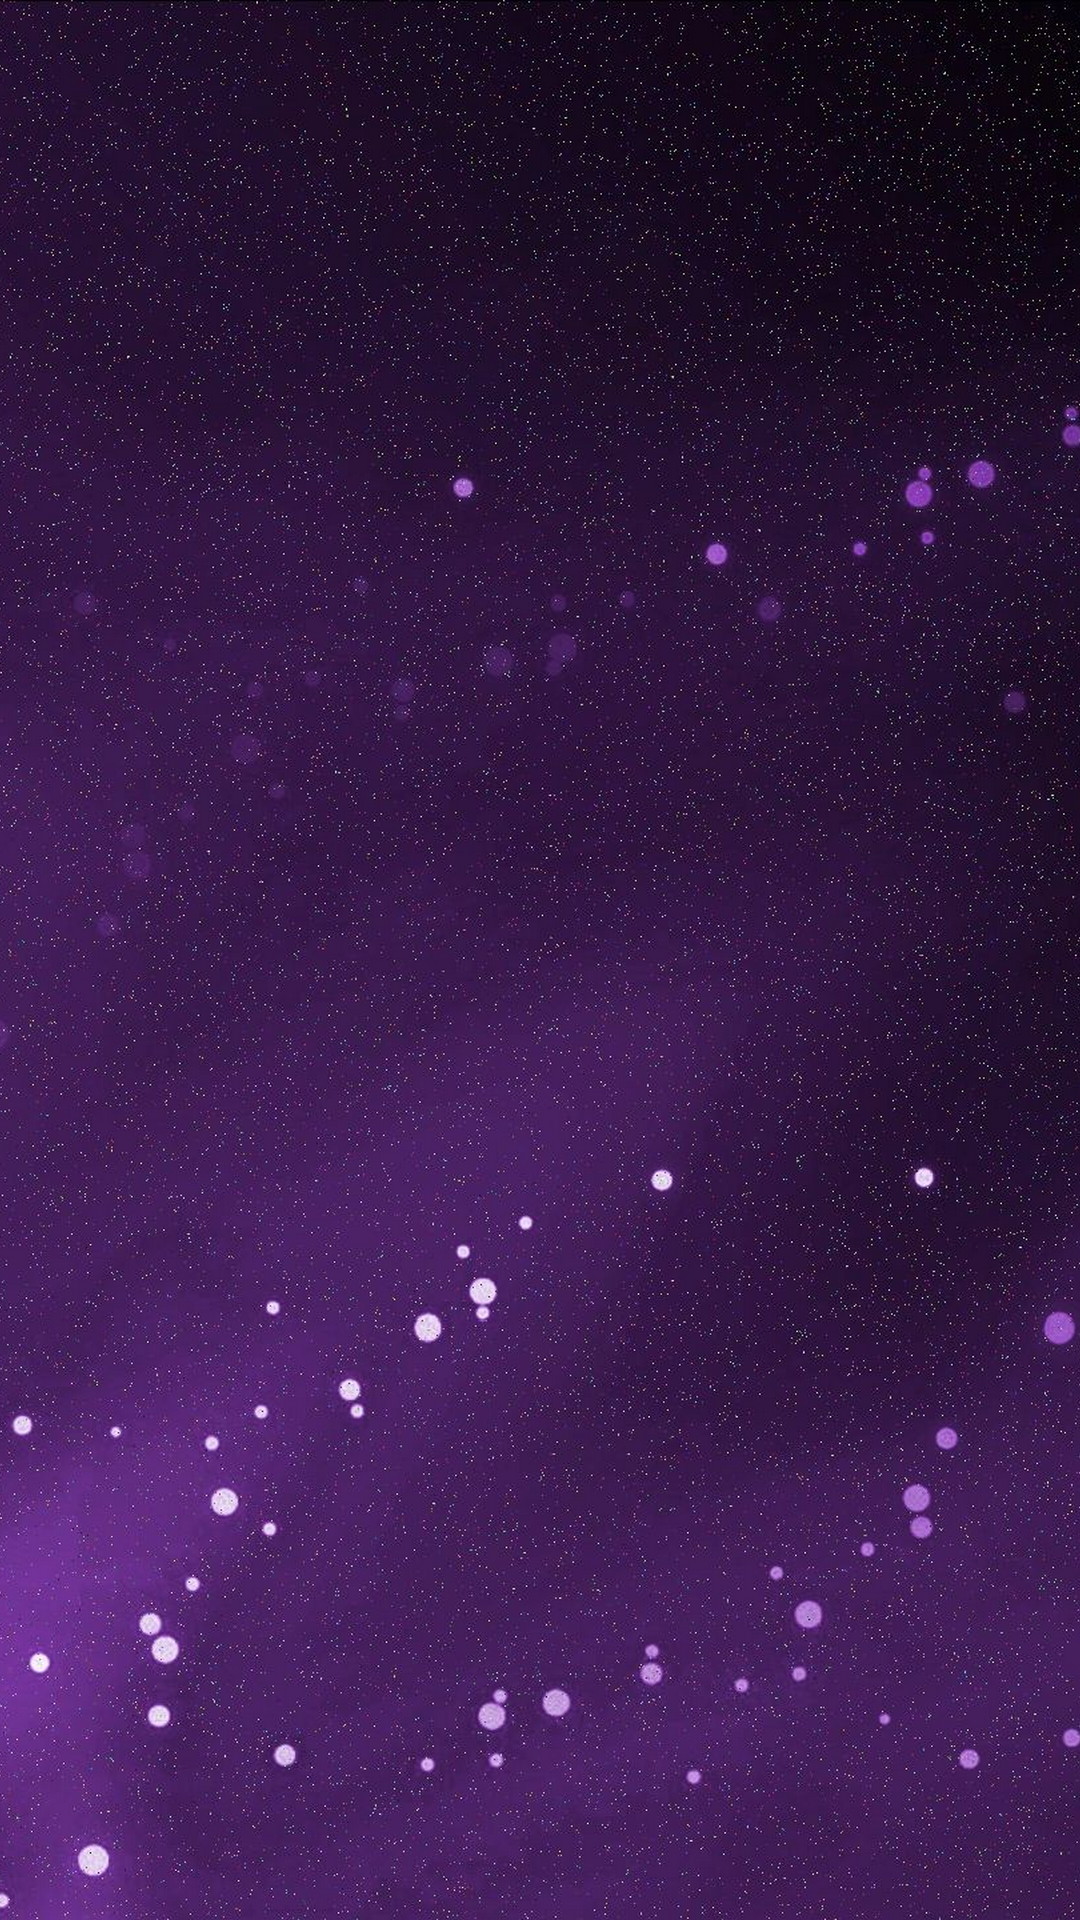 Purple iPhone X Wallpaper With high-resolution 1080X1920 pixel. You can use this wallpaper for your iPhone 5, 6, 7, 8, X, XS, XR backgrounds, Mobile Screensaver, or iPad Lock Screen